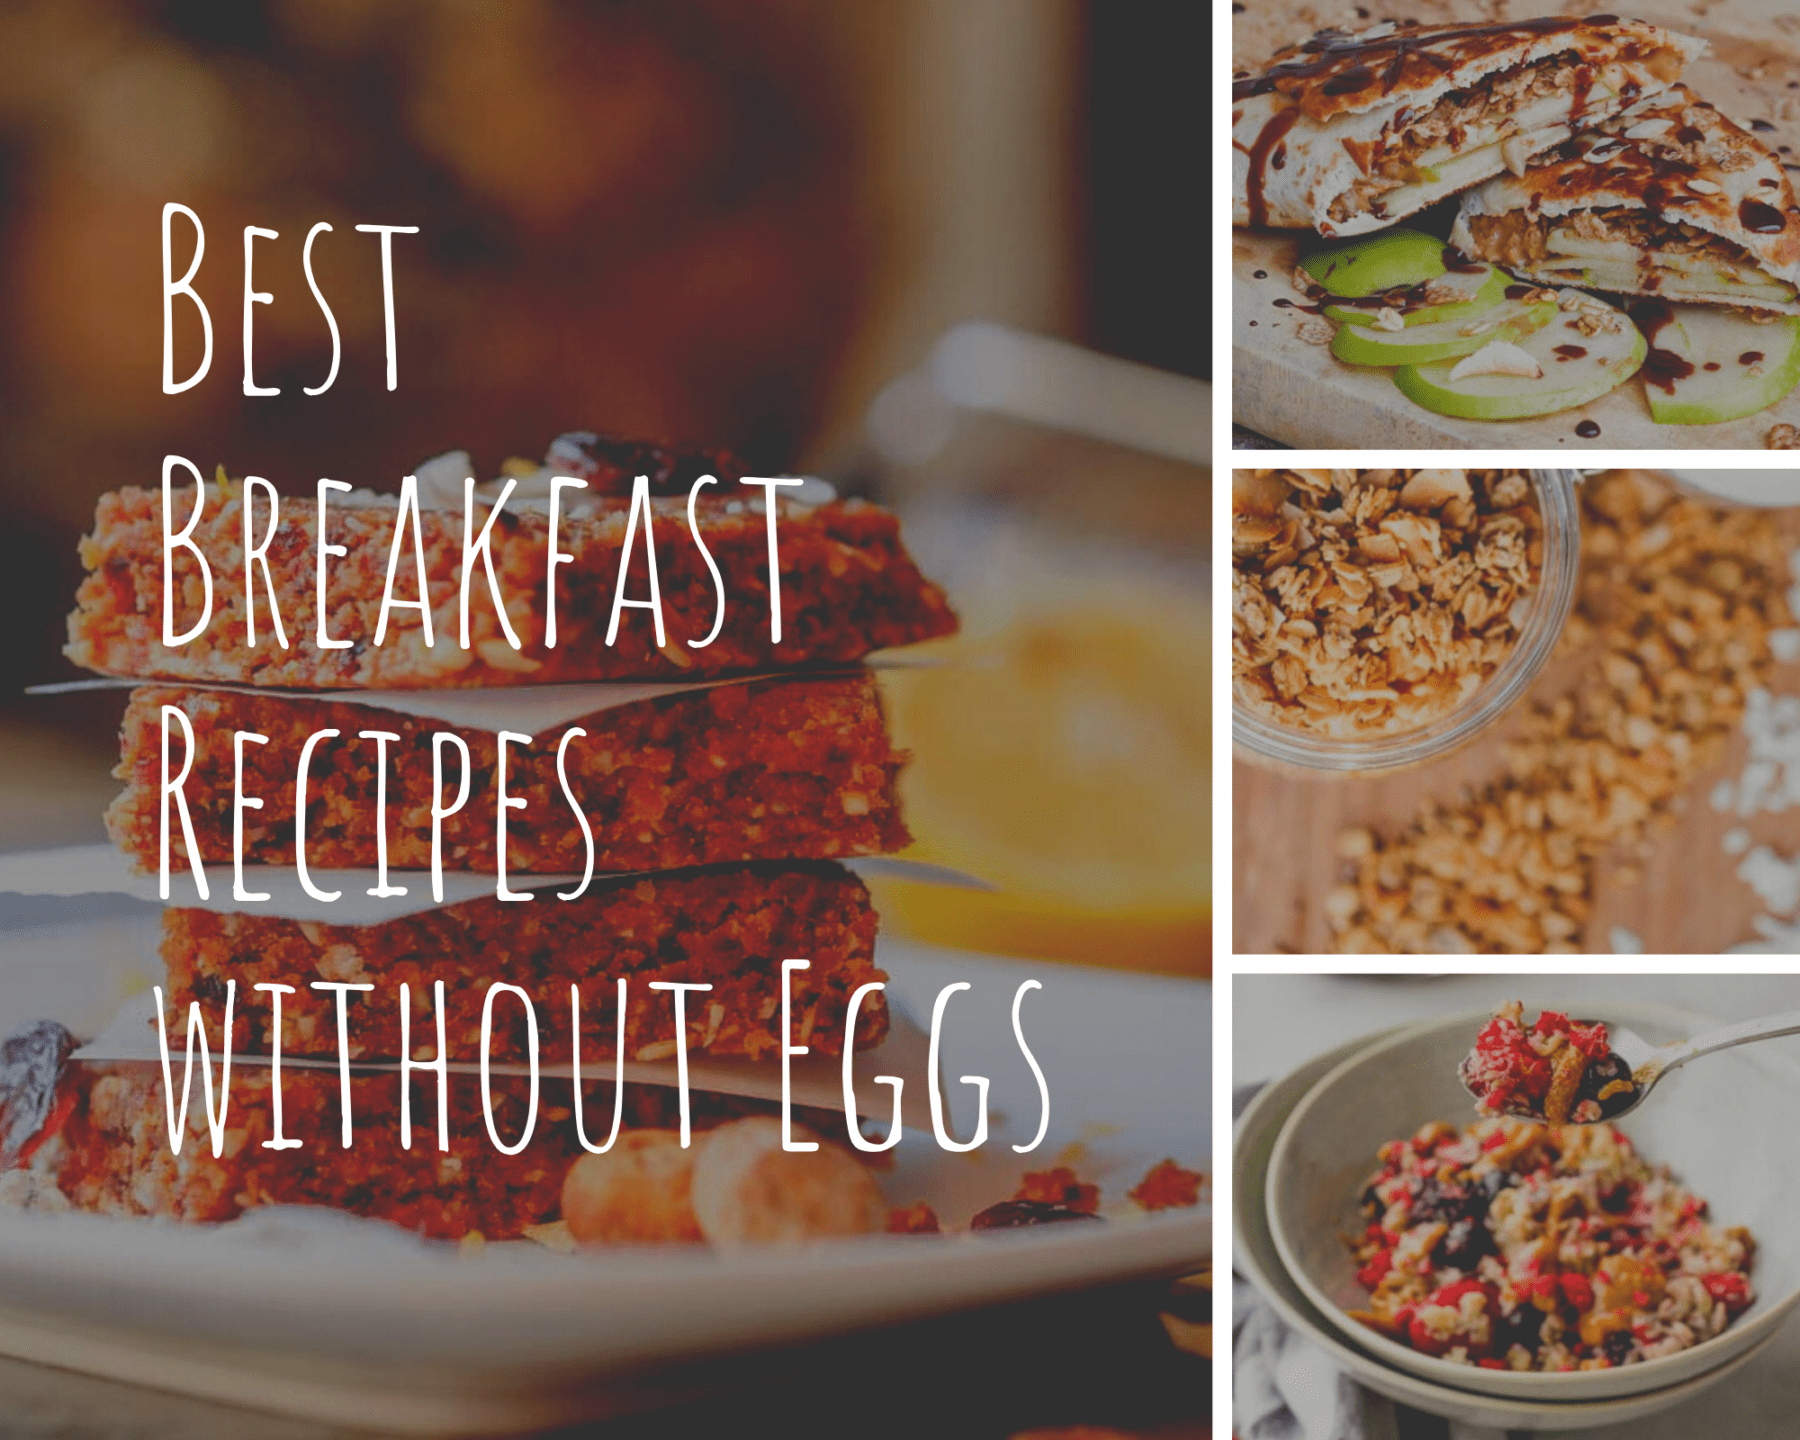 https://avocadopesto.com/wp-content/uploads/2021/04/Best-Breakfast-Recipes-without-Eggs.png